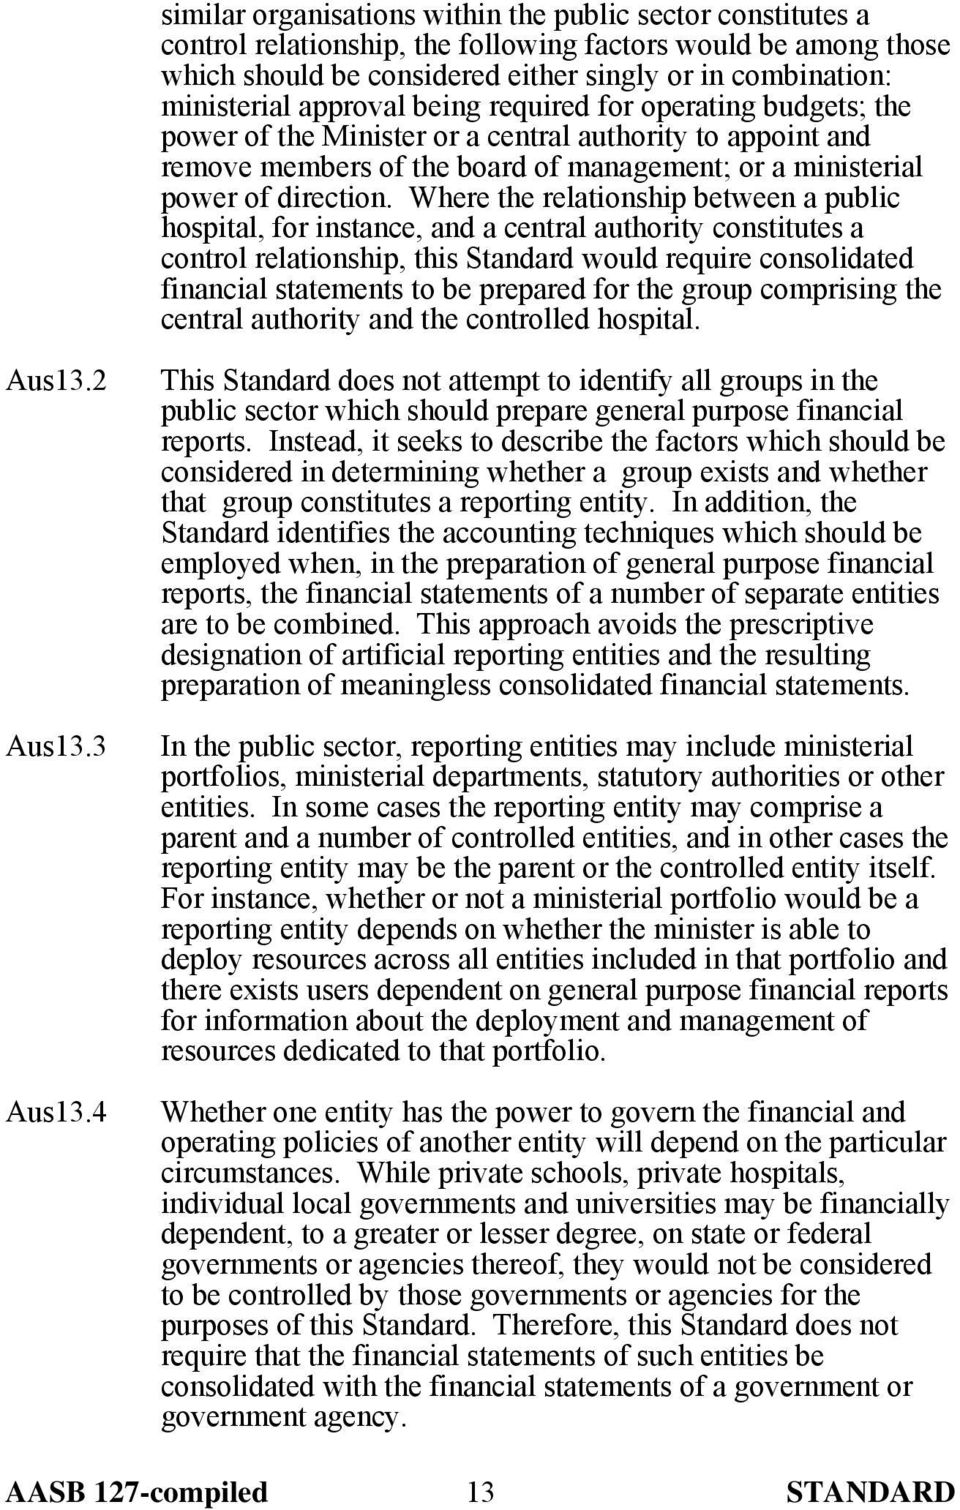 Where the relationship between a public hospital, for instance, and a central authority constitutes a control relationship, this Standard would require consolidated financial statements to be